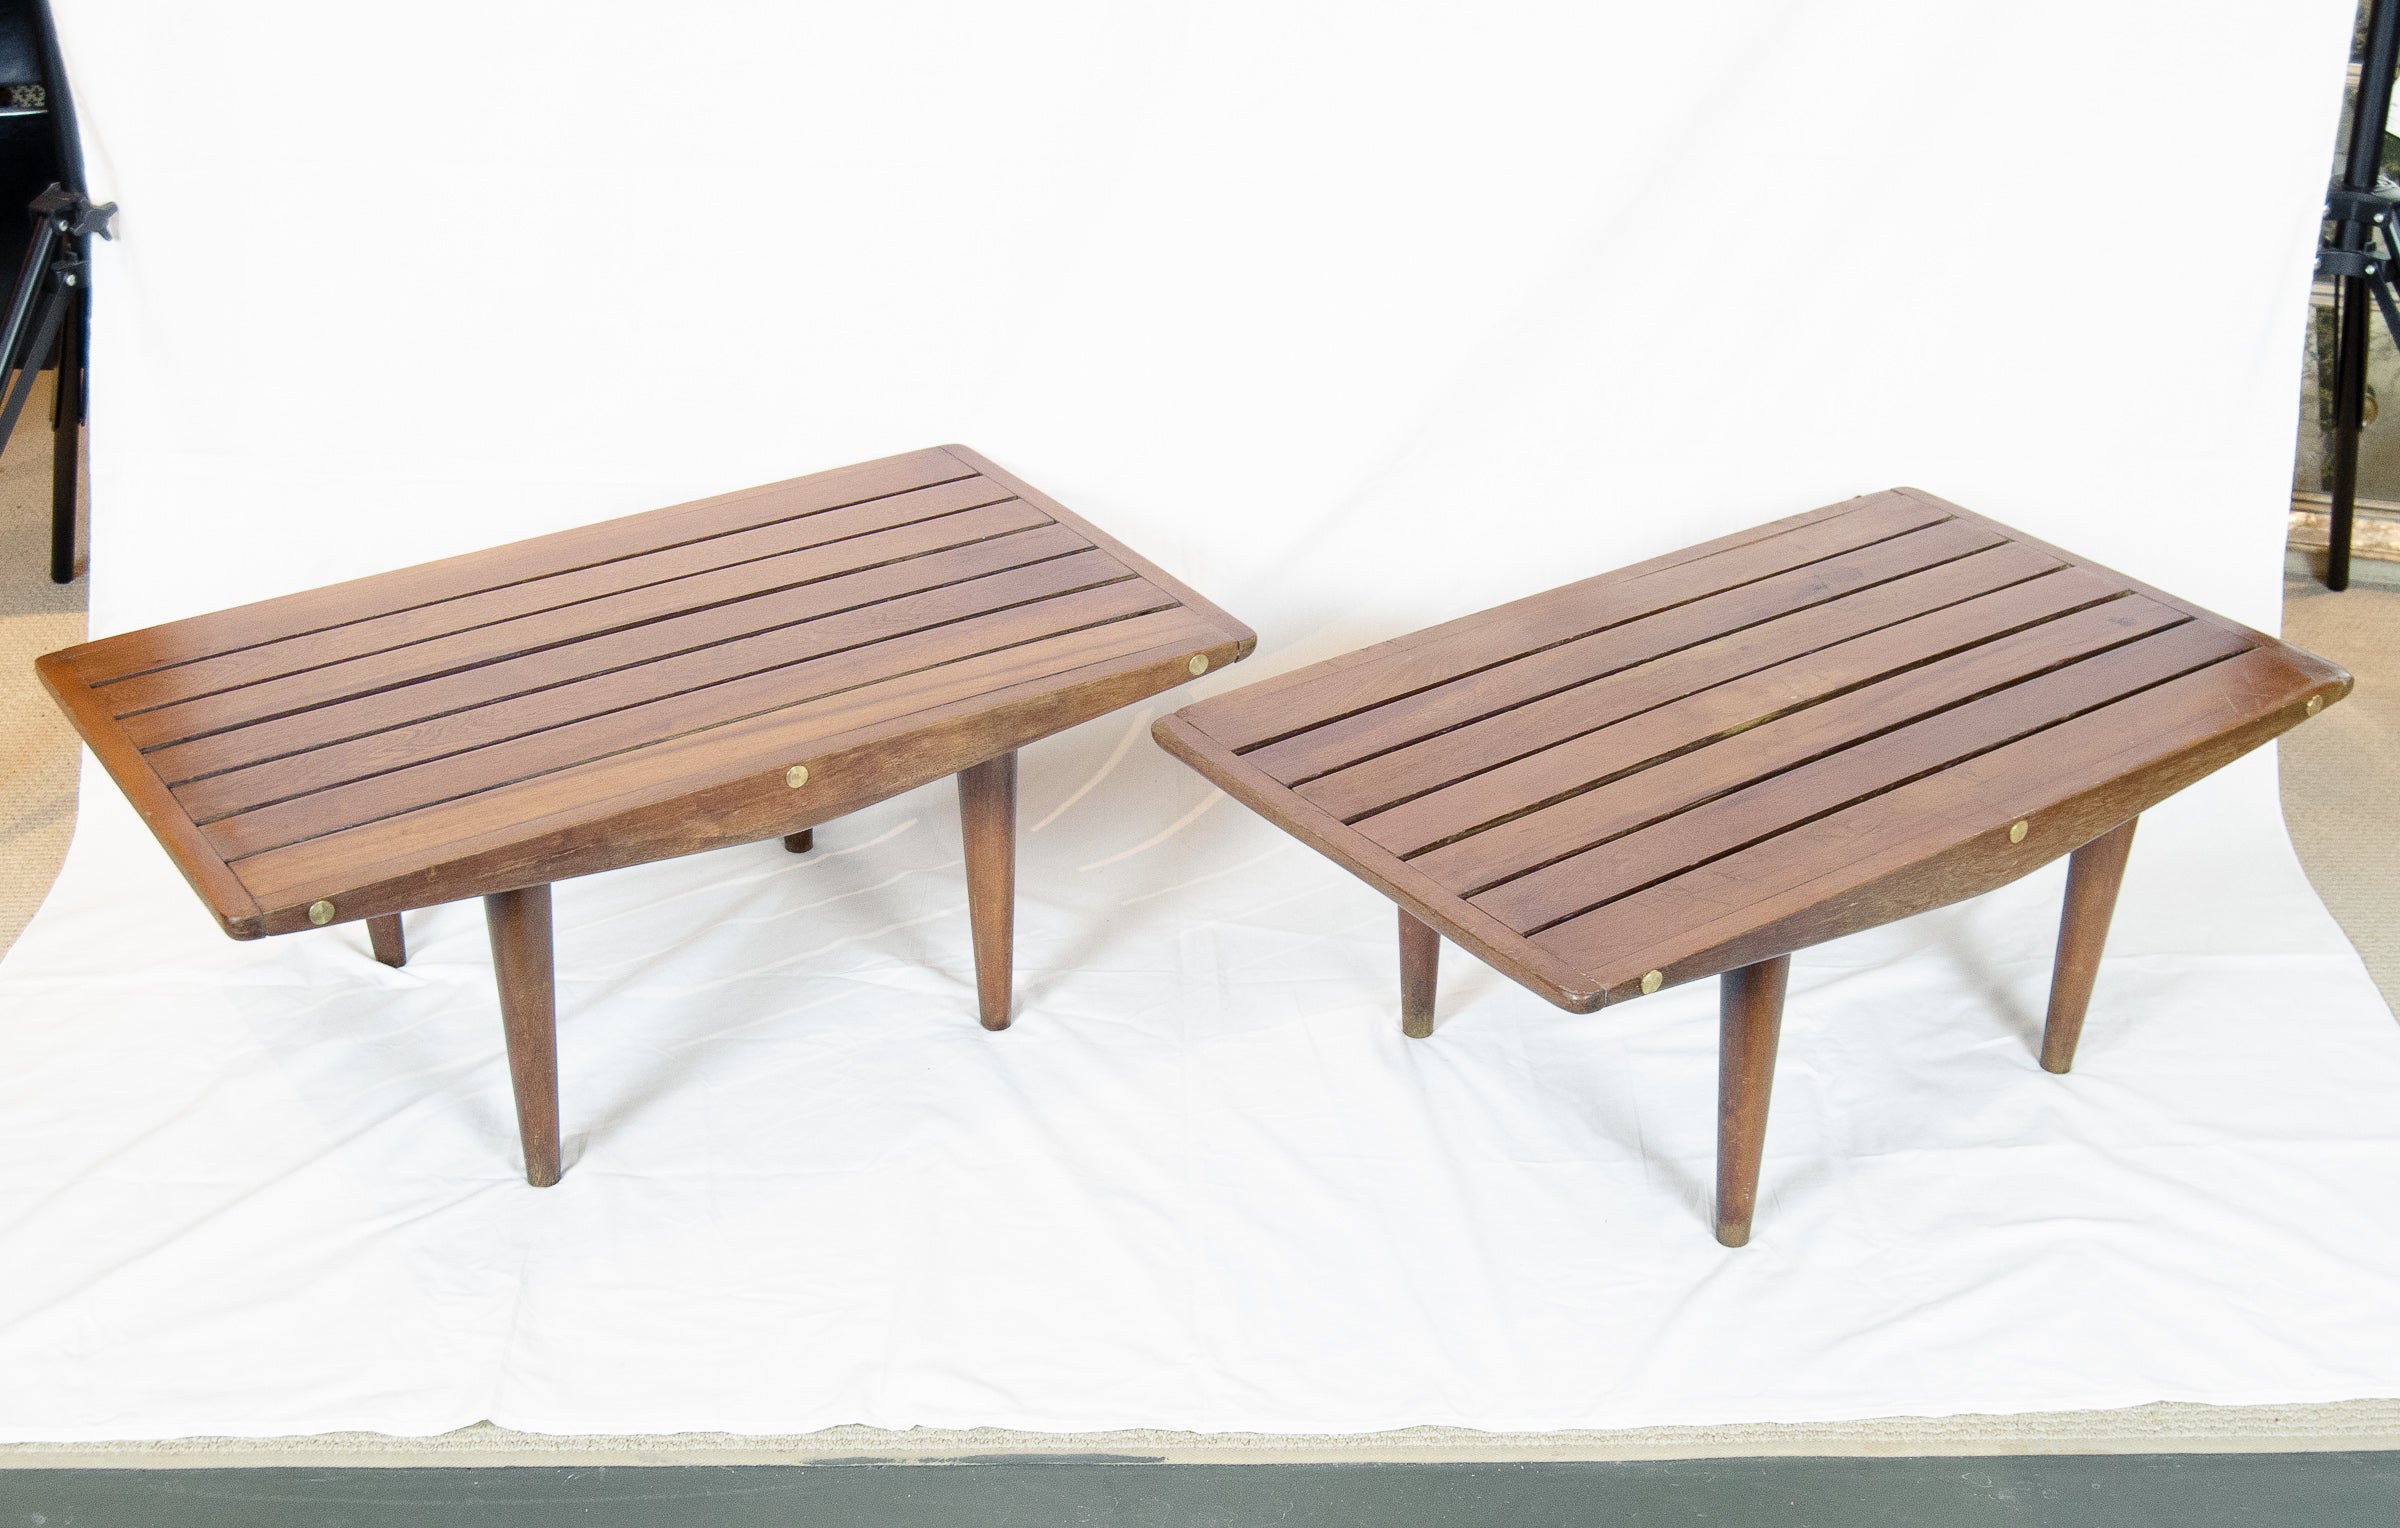 Studio-Made Slat Benches with Brass Accents